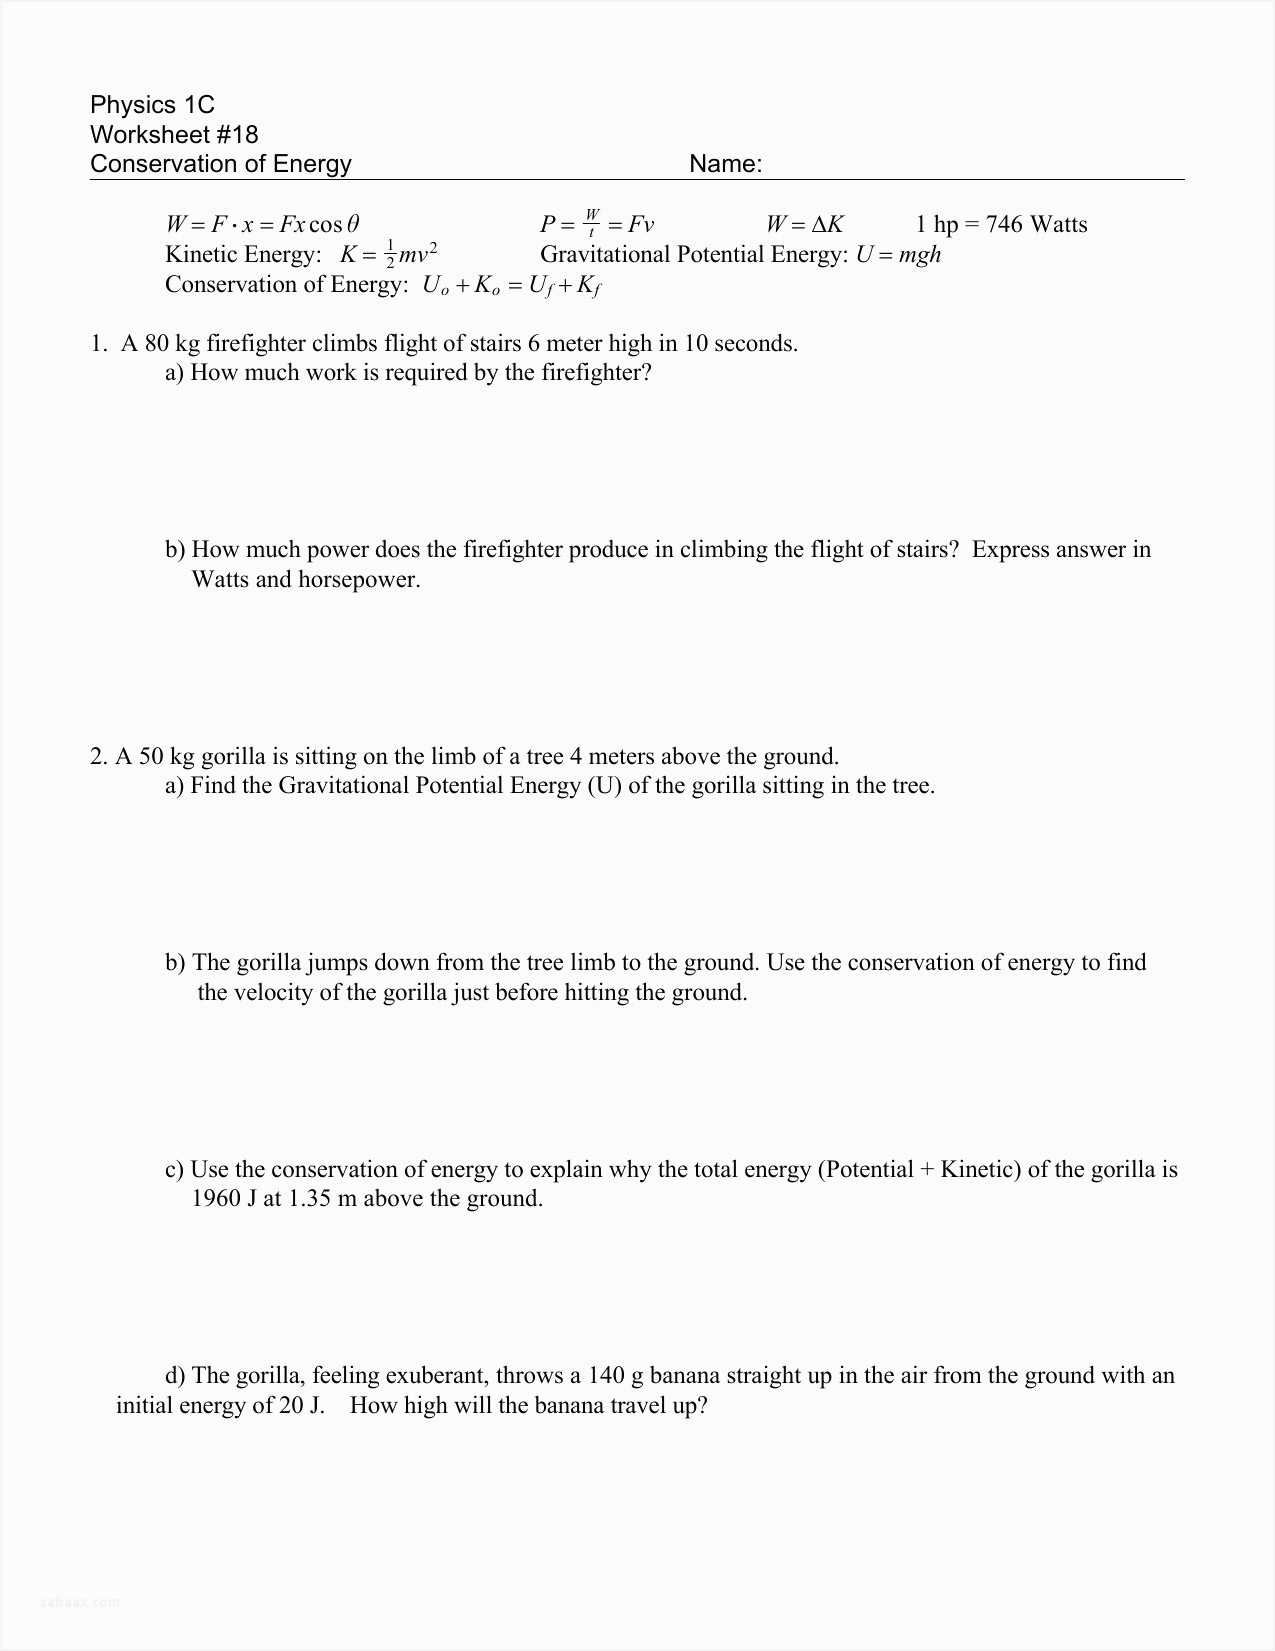 Physical Science Worksheet Conservation Of Energy 2 Answer Key Along with Collection Of Conservation Of Energy Worksheet with Answers